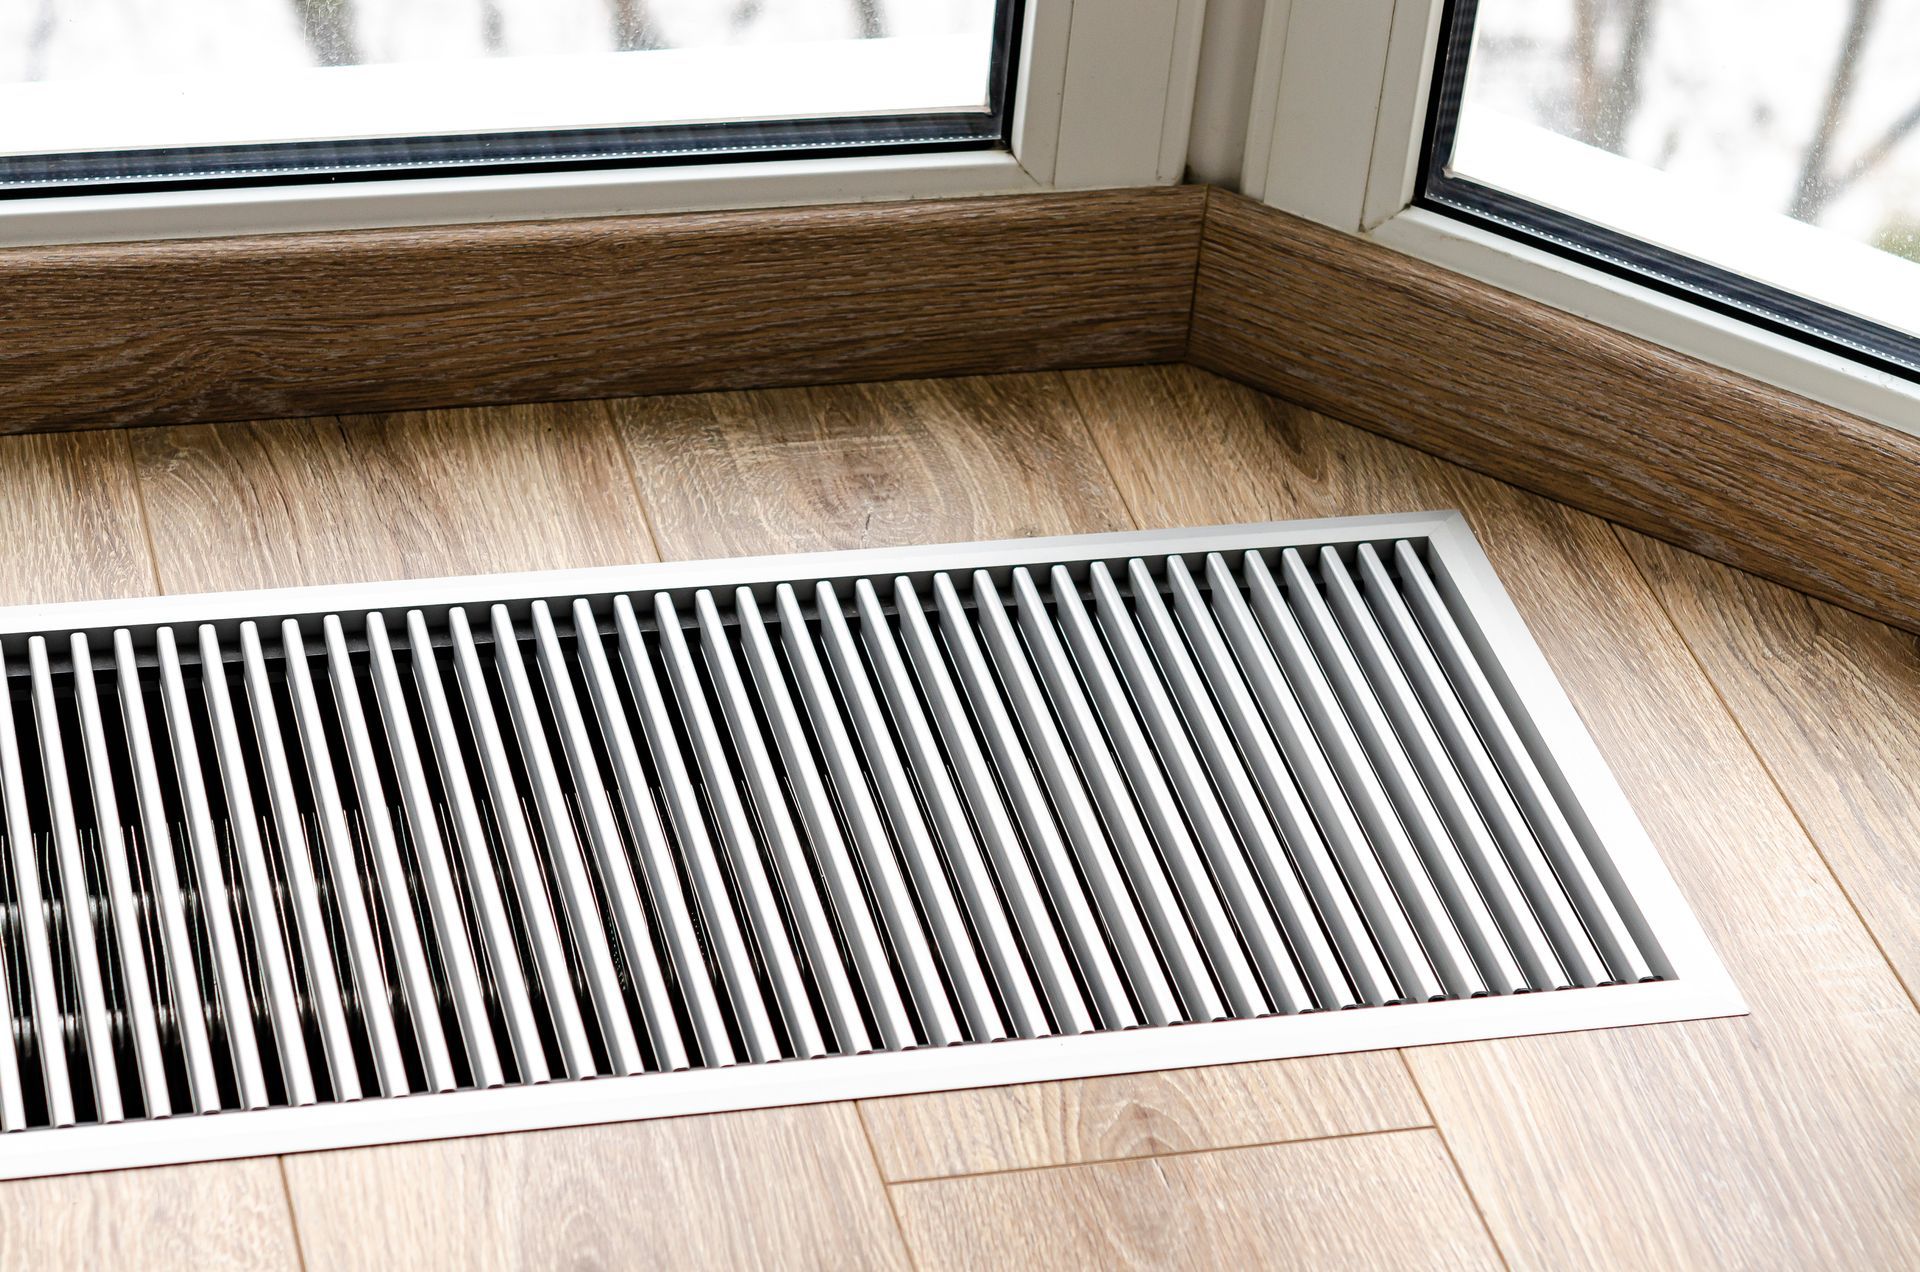 a protective heating grille mounted on the floor blowing cool air